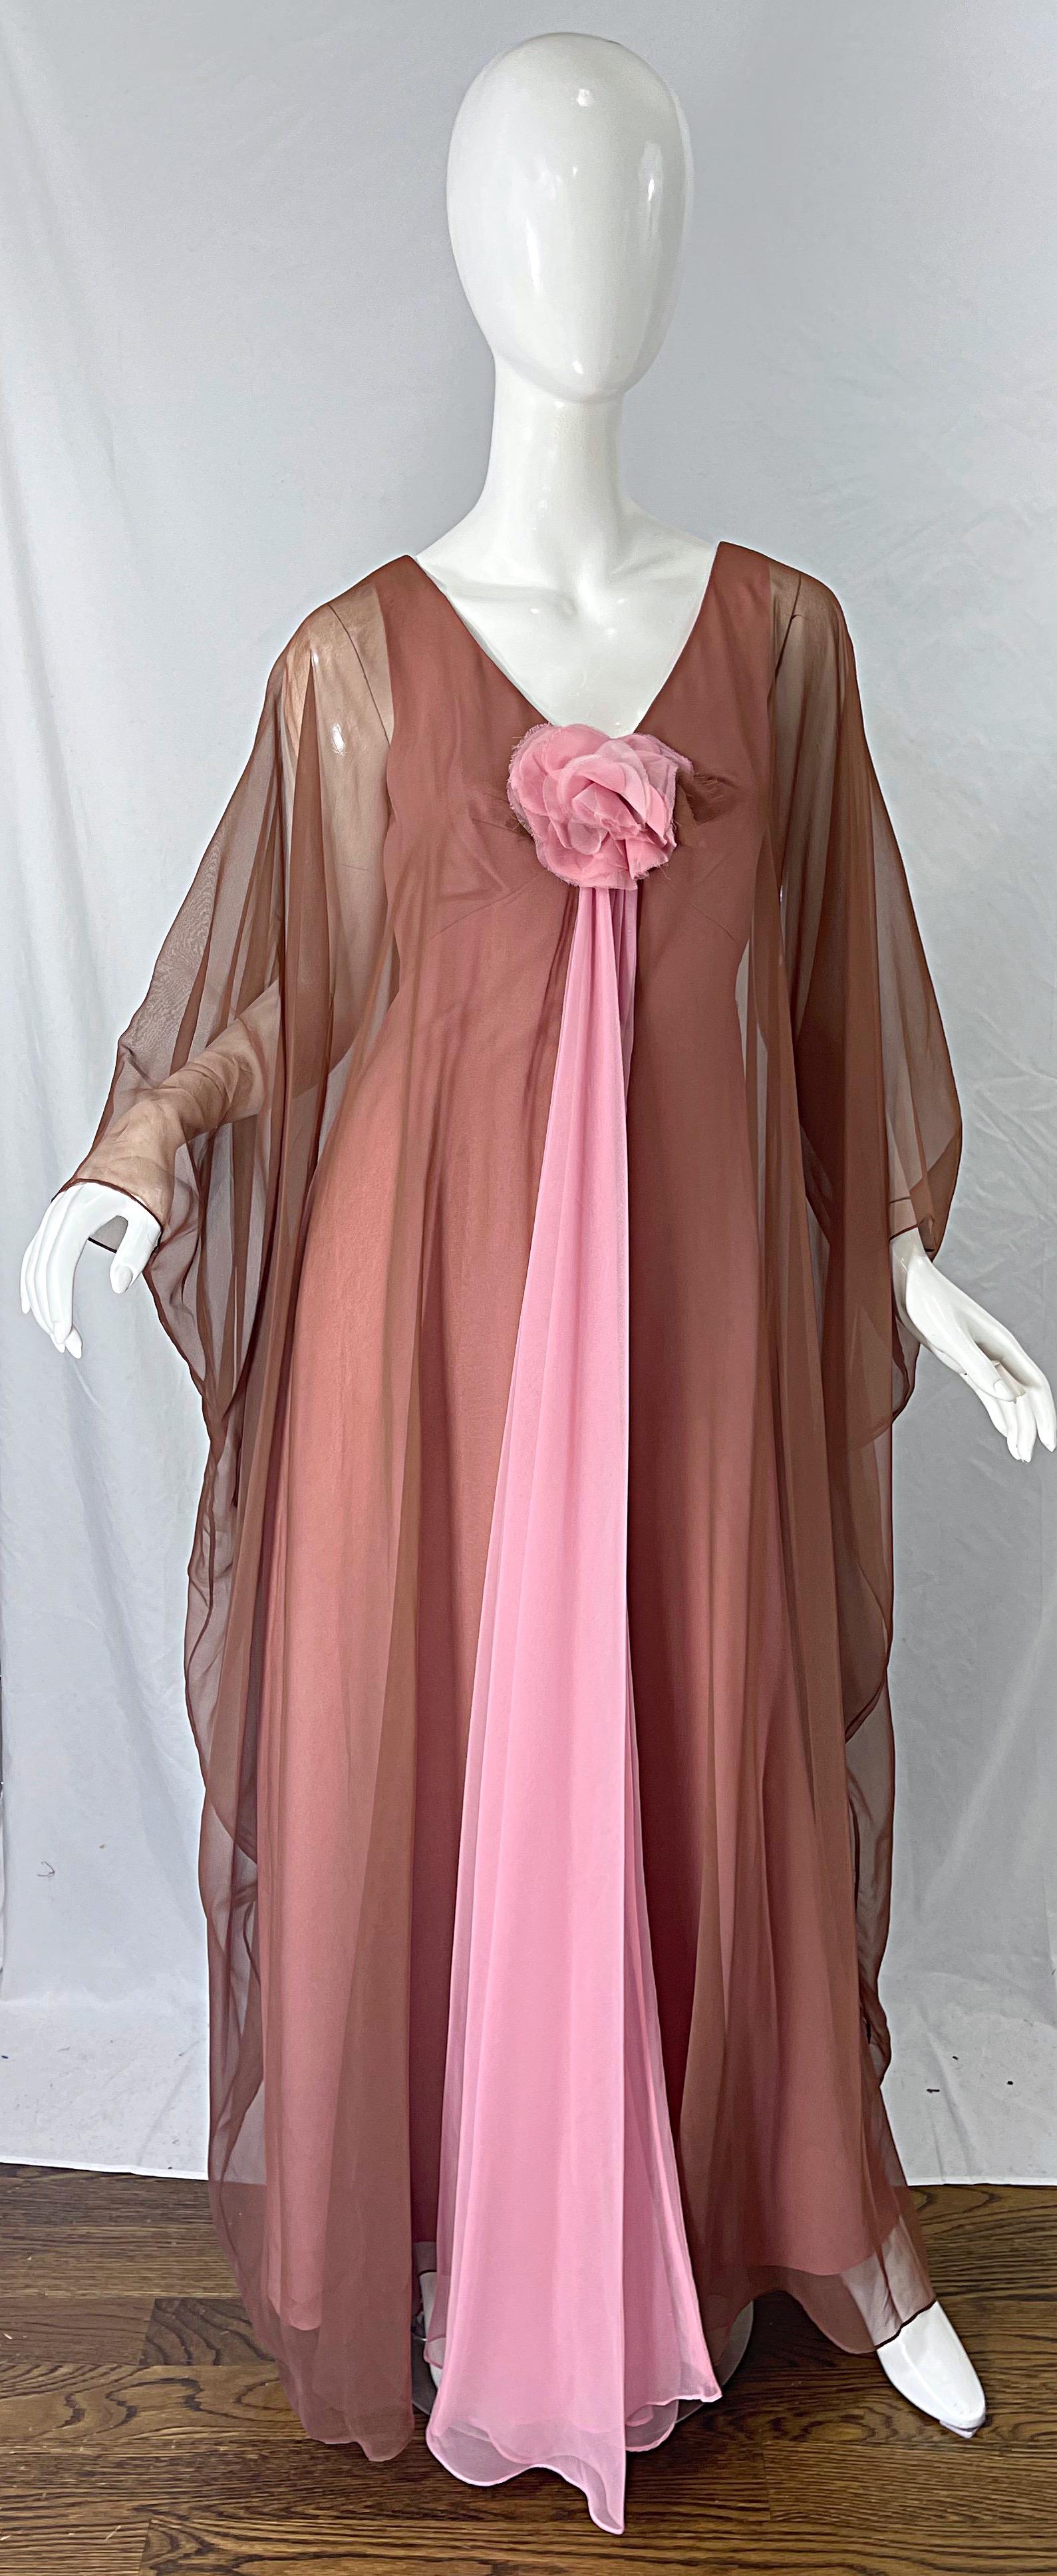 1970s ESTEVEZ bubblegum pink and nude brown chiffon caftan maxi dress ! Flower applique at center bust. Full metal zipper up the back with hook-and-eye closure. Great for any day or evening event. In great condition. Very well made, with lots of